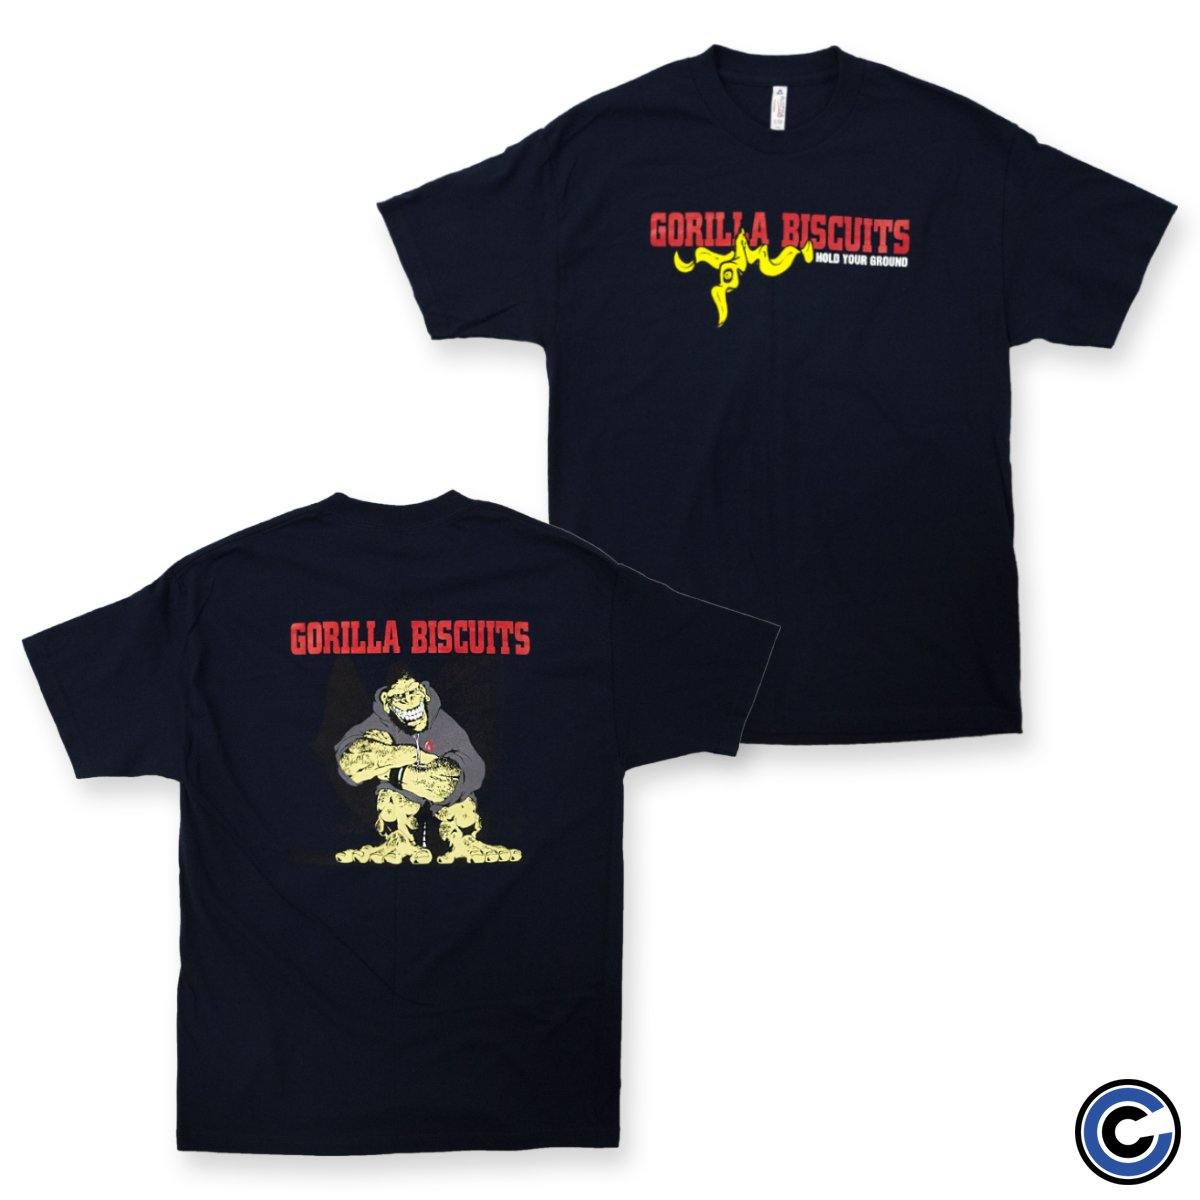 Buy – Gorilla Biscuits "Hold Your Ground" Shirt – Band & Music Merch – Cold Cuts Merch